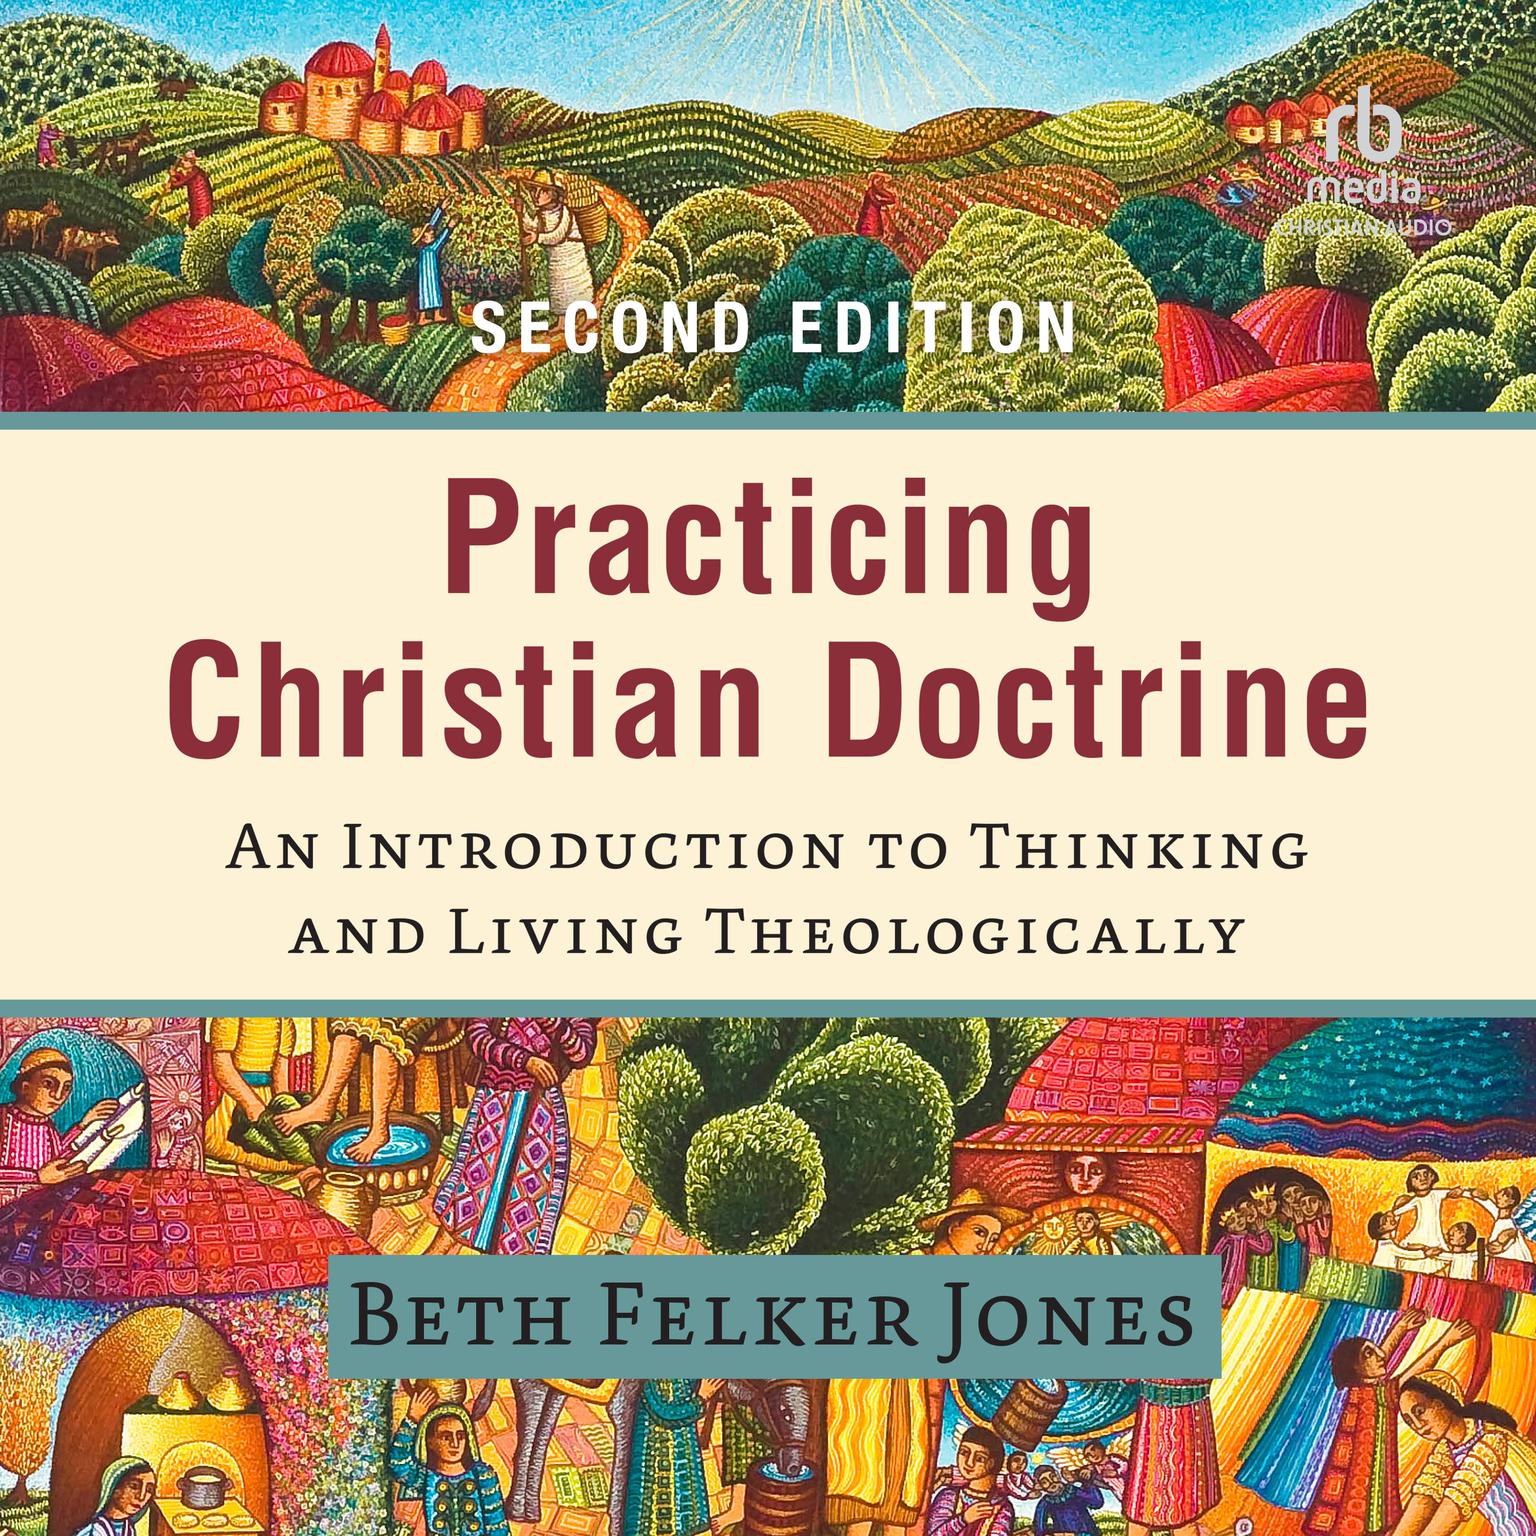 Practicing Christian Doctrine: An Introduction to Thinking and Living Theologically Audiobook, by Beth Felker Jones